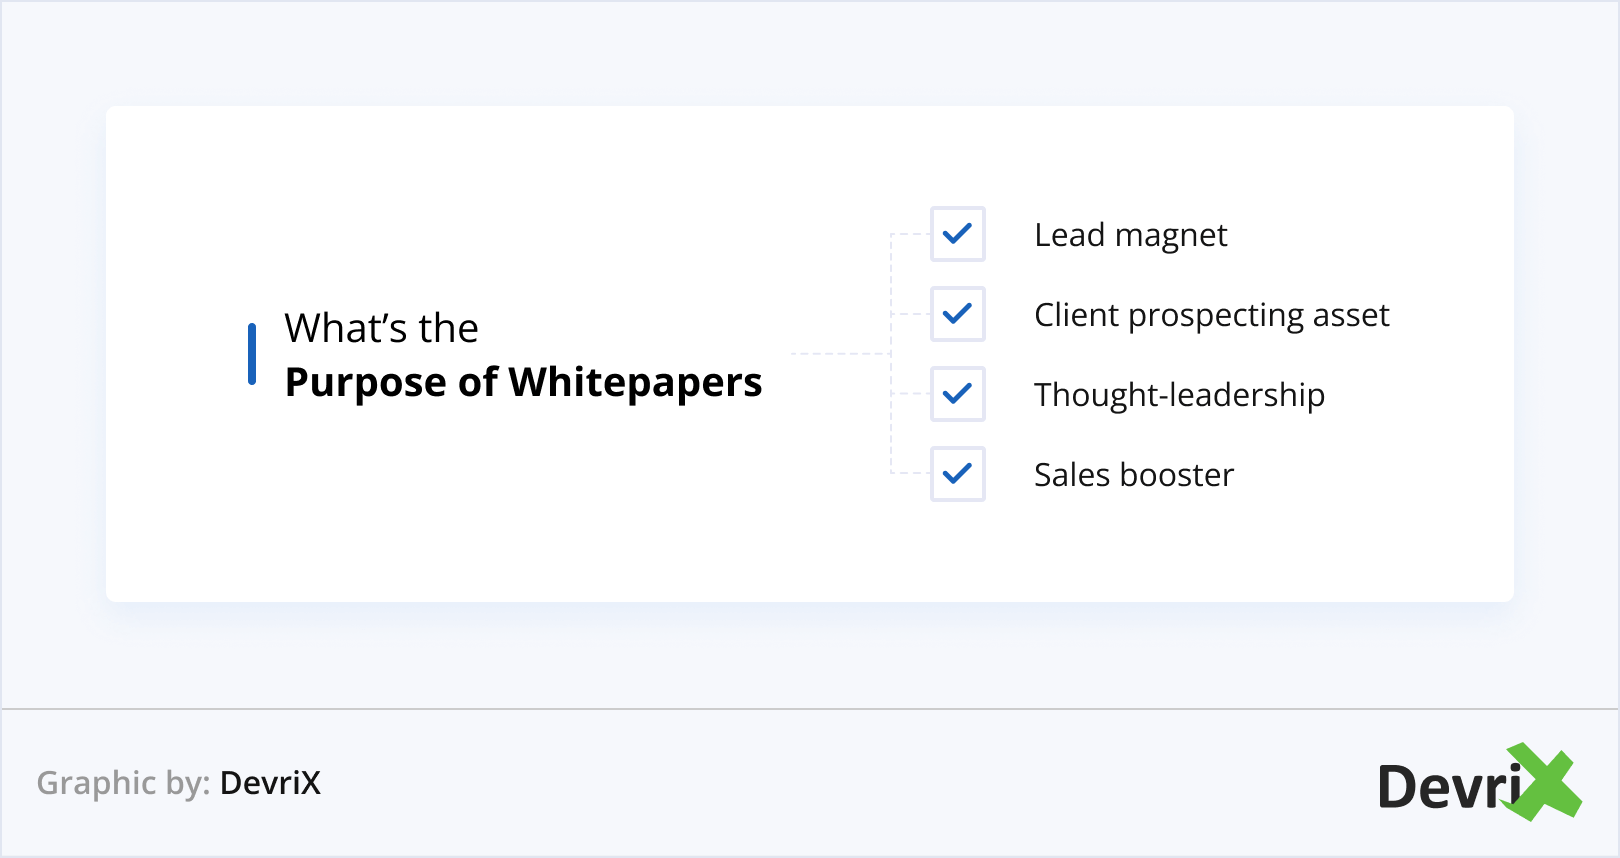 What Is the Purpose of Whitepapers?